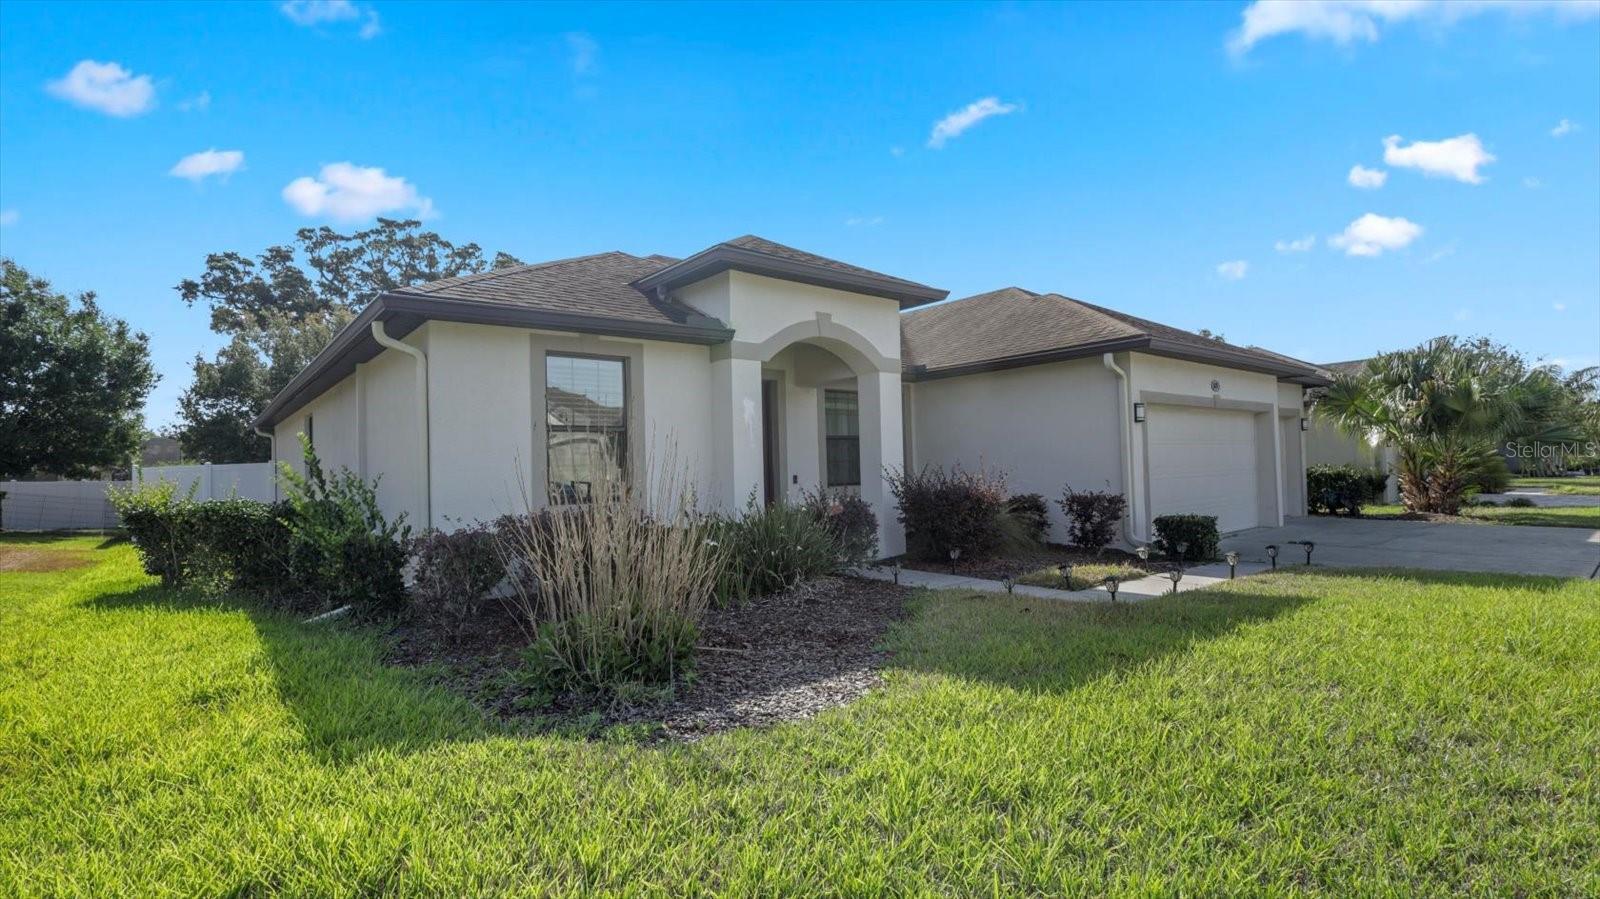 Photo one of 680 Challice Dr Spring Hill FL 34609 | MLS U8237822